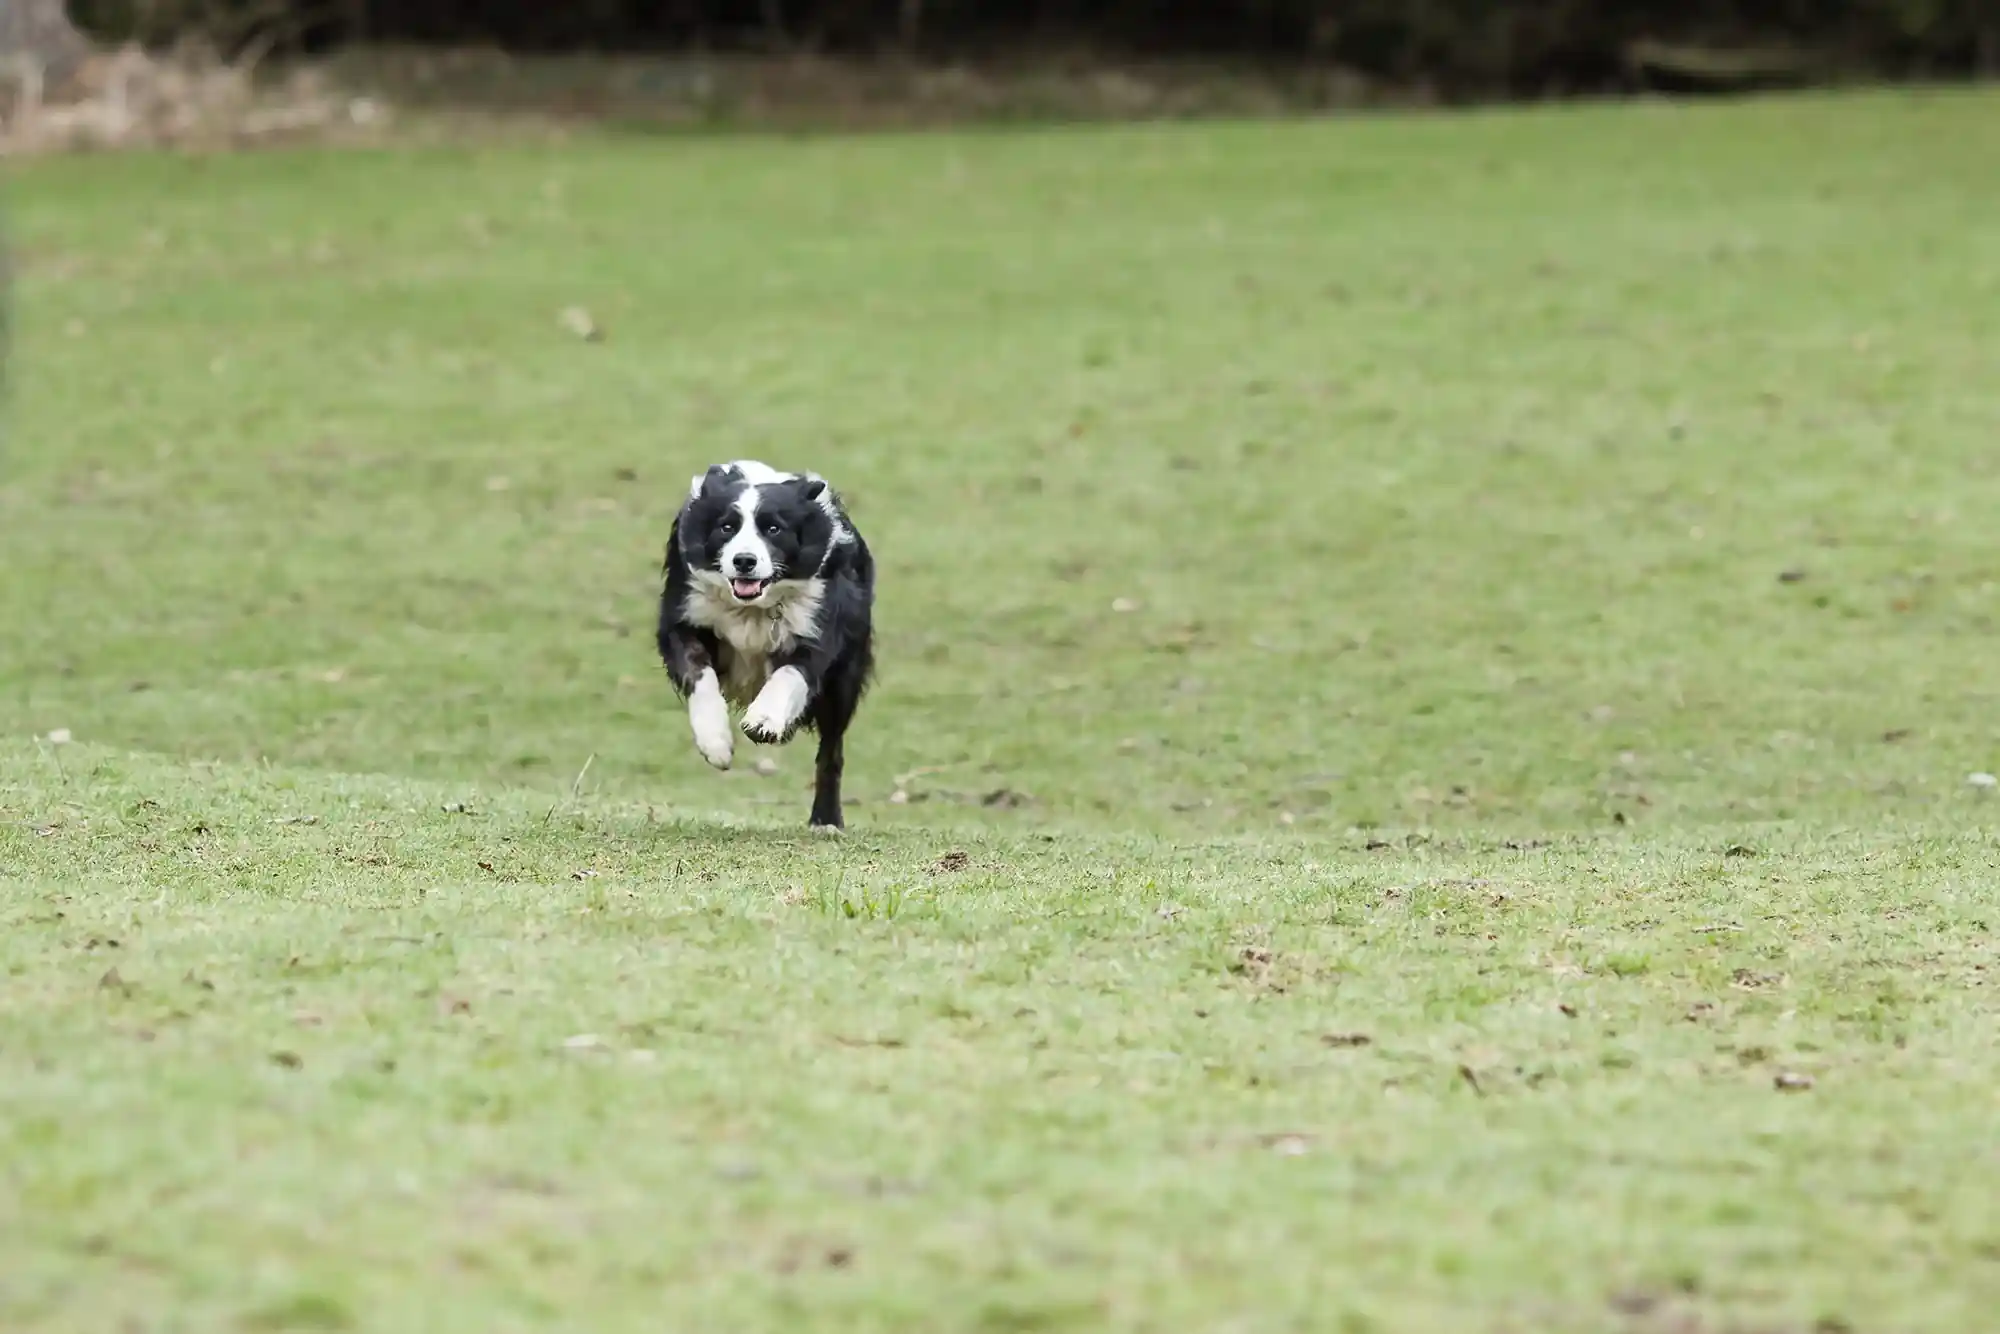 A black and white dog runs across a grassy field, with all four paws off the ground.